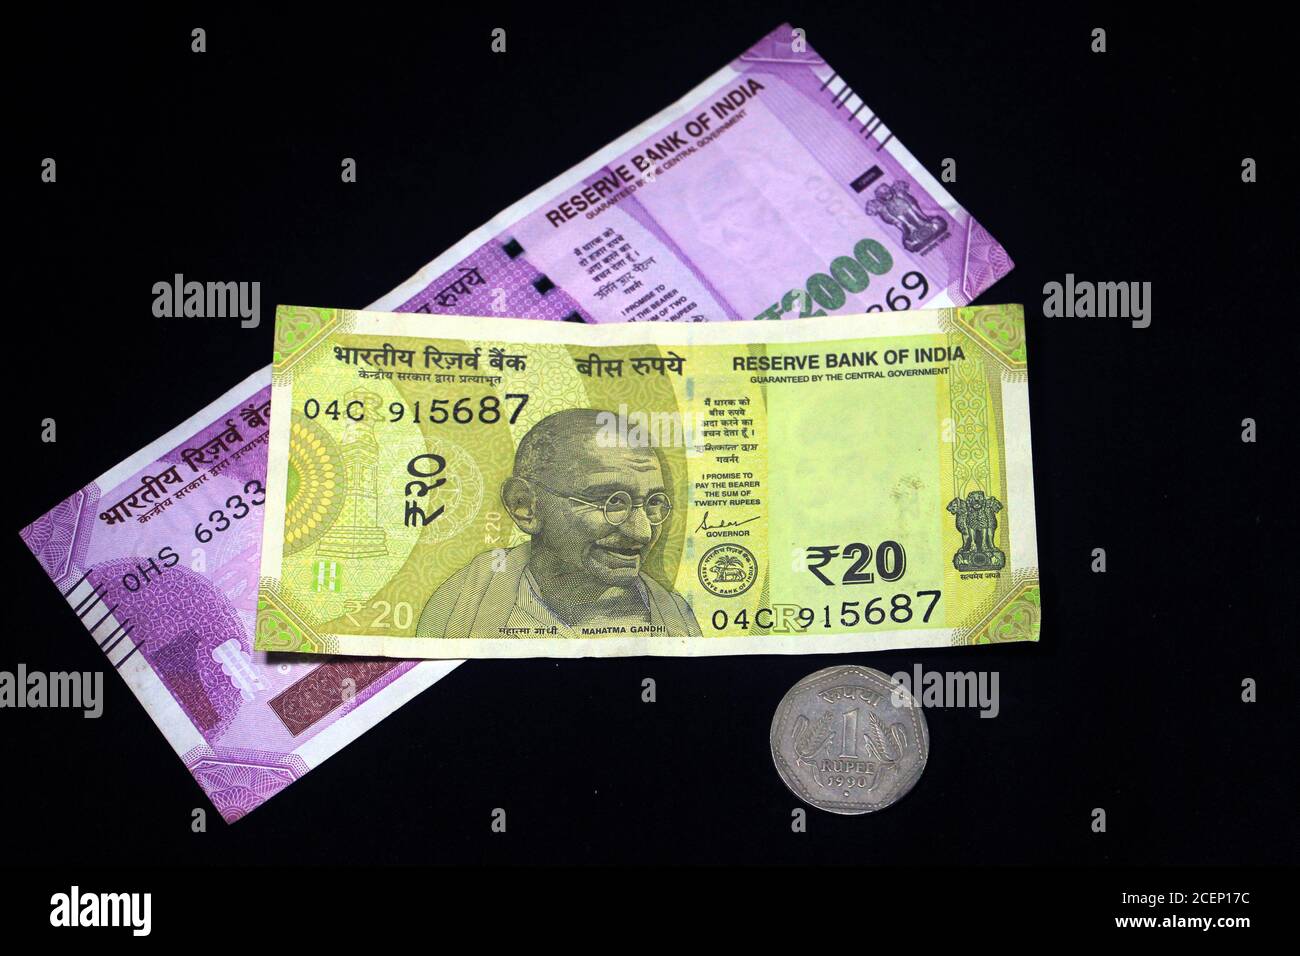 Indian Money with 2021 new year concept on black background. Concept of New Year 2021 with Indian currency. Indian currencies on black background. Stock Photo